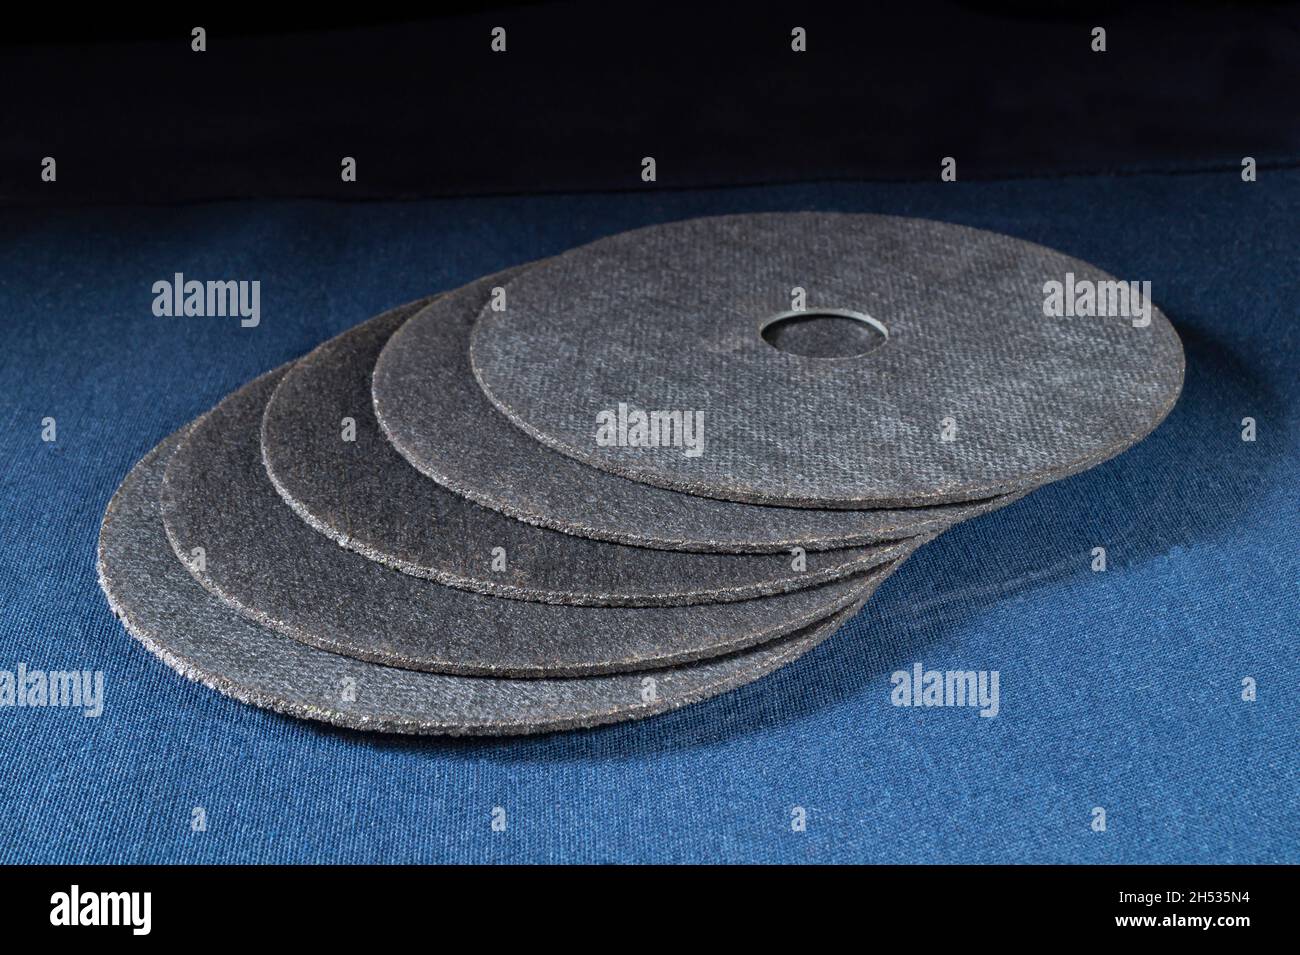 A cutting disc for a grinder on a blue table. Locksmith tools on a black background Stock Photo